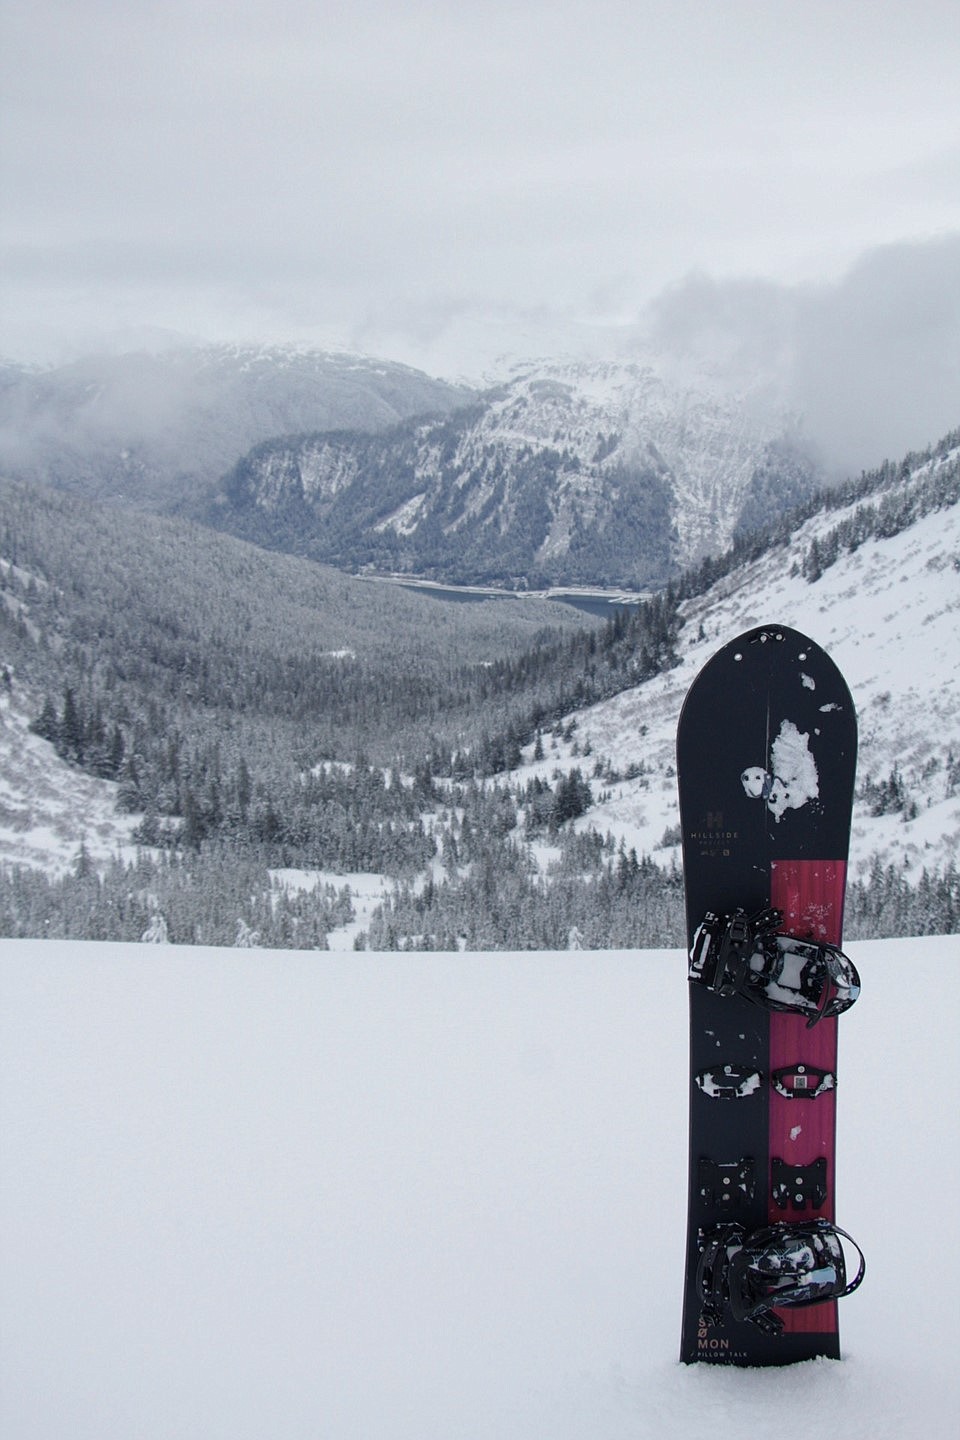 CDN outdoors columnist Kayla Heidenreich's snowboard stands up in the snow in the Tongass National Forest. Snowboarding for work and play requires balance.